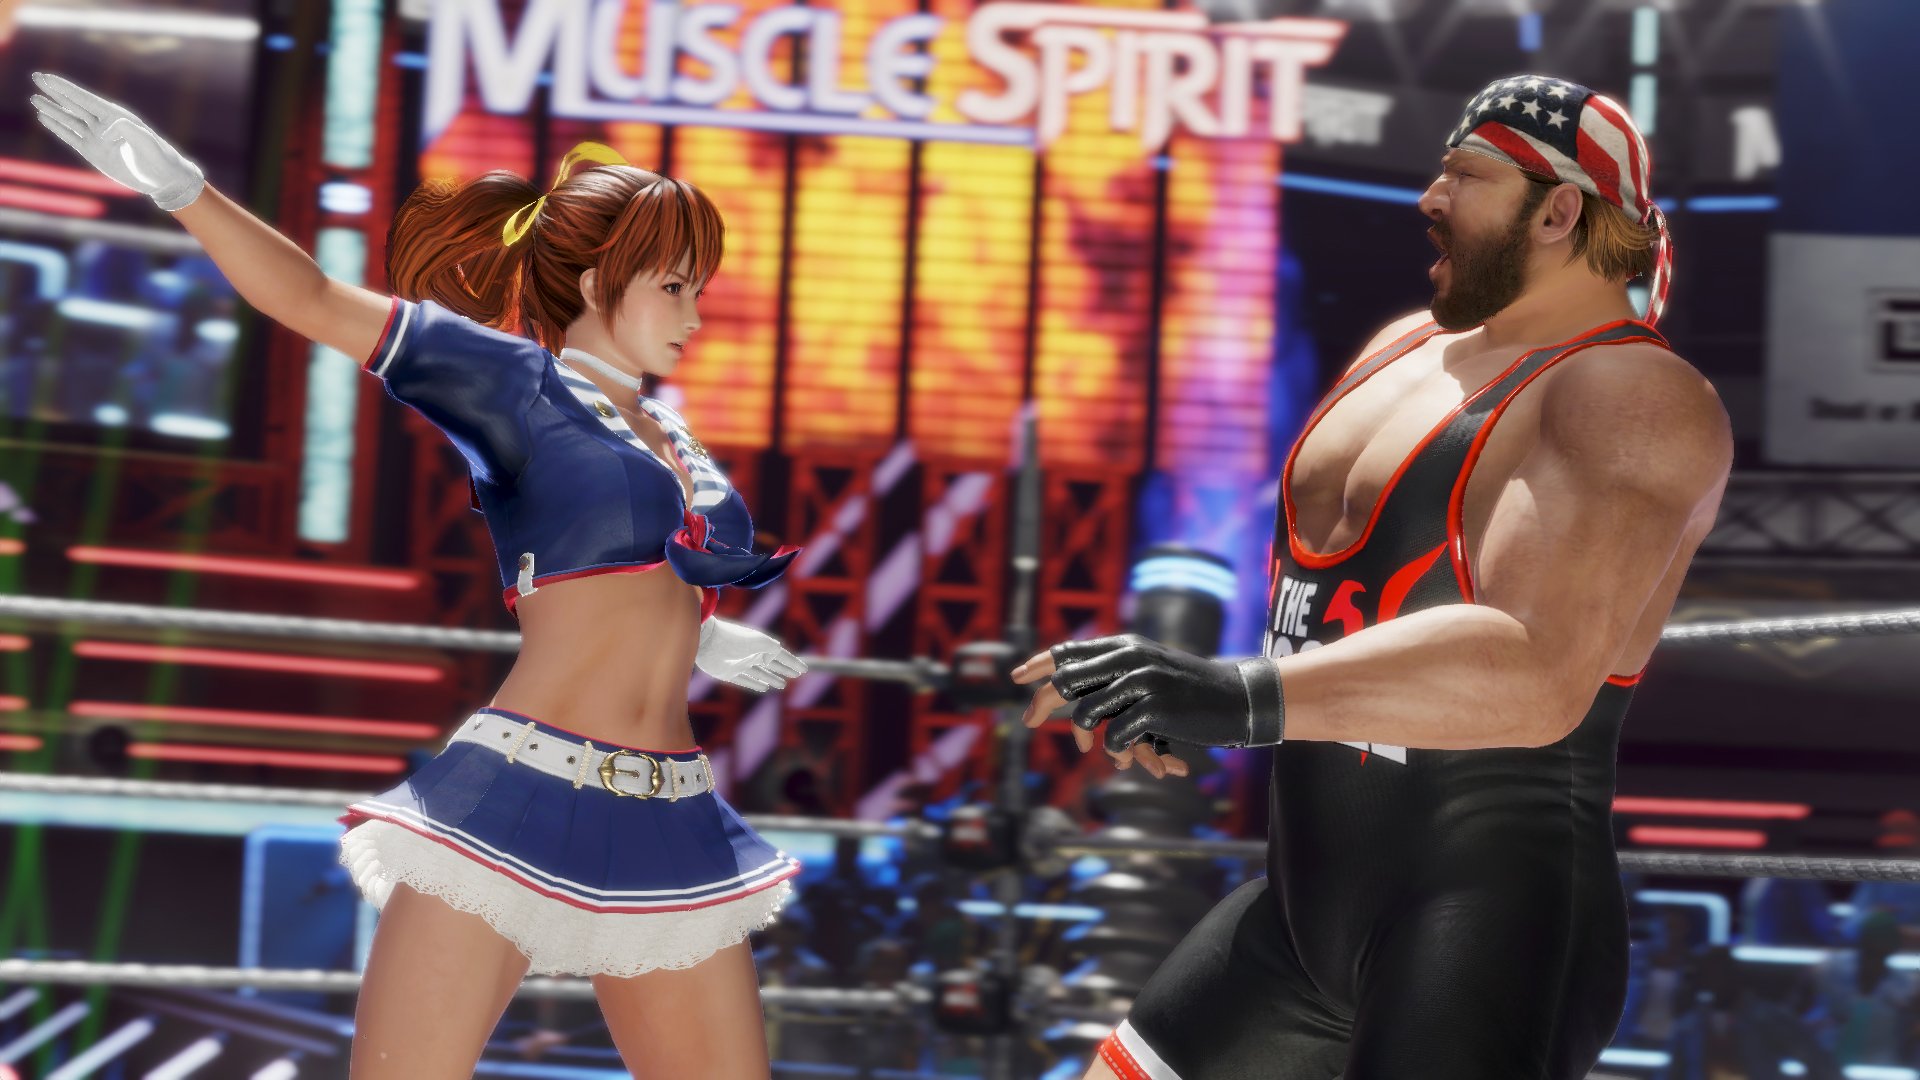 Dead or alive 6 